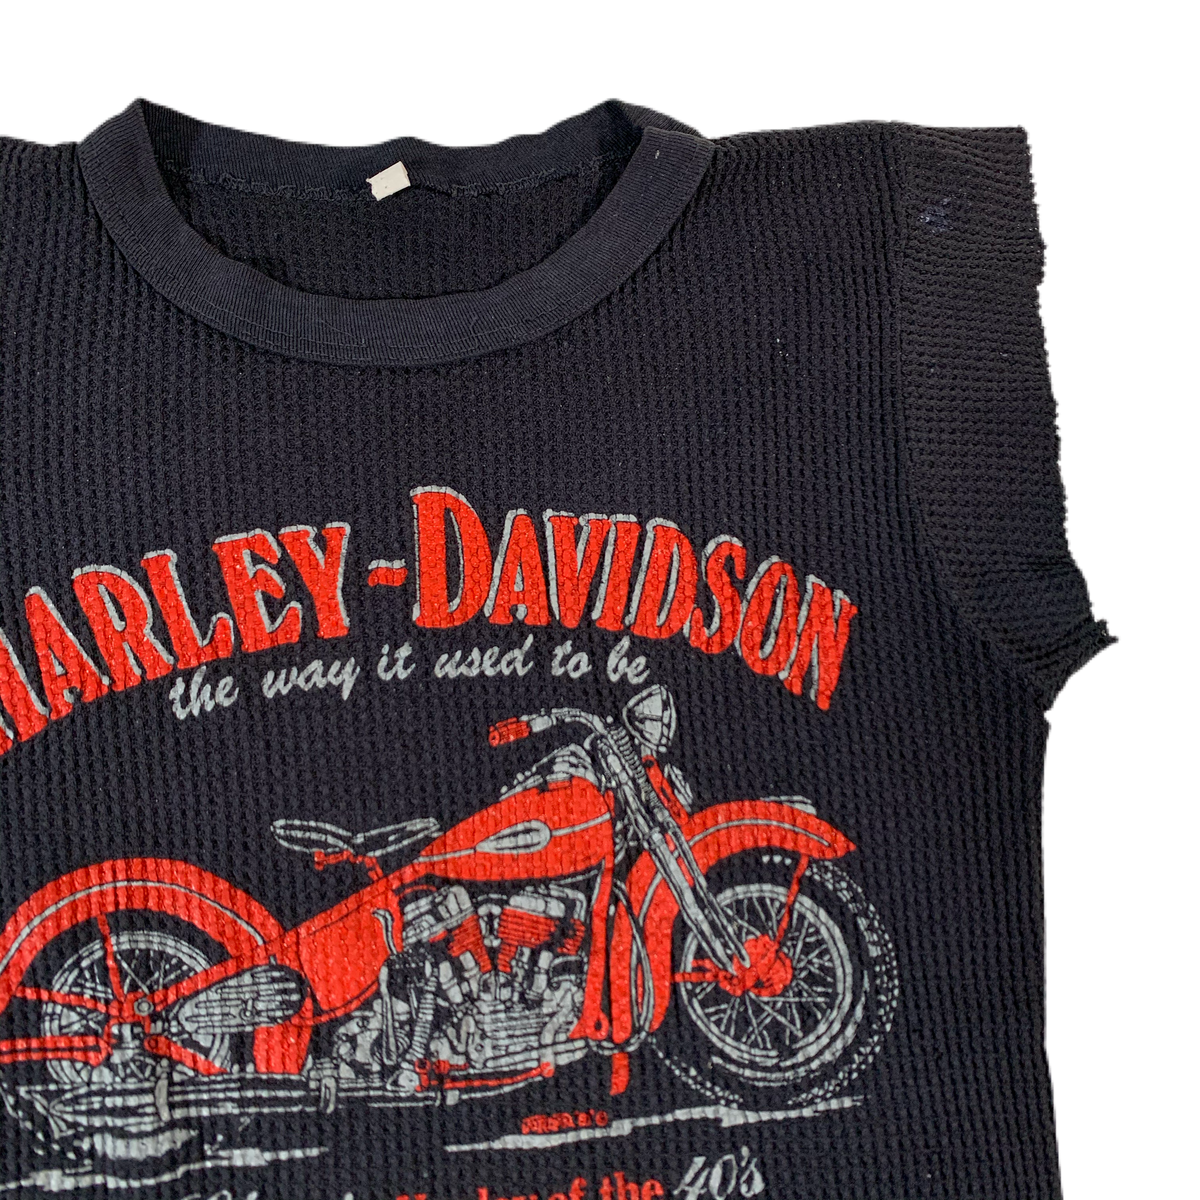 Vintage Harley-Davidson “The Way It Used To Be” Thermal Shirt - jointcustodydc